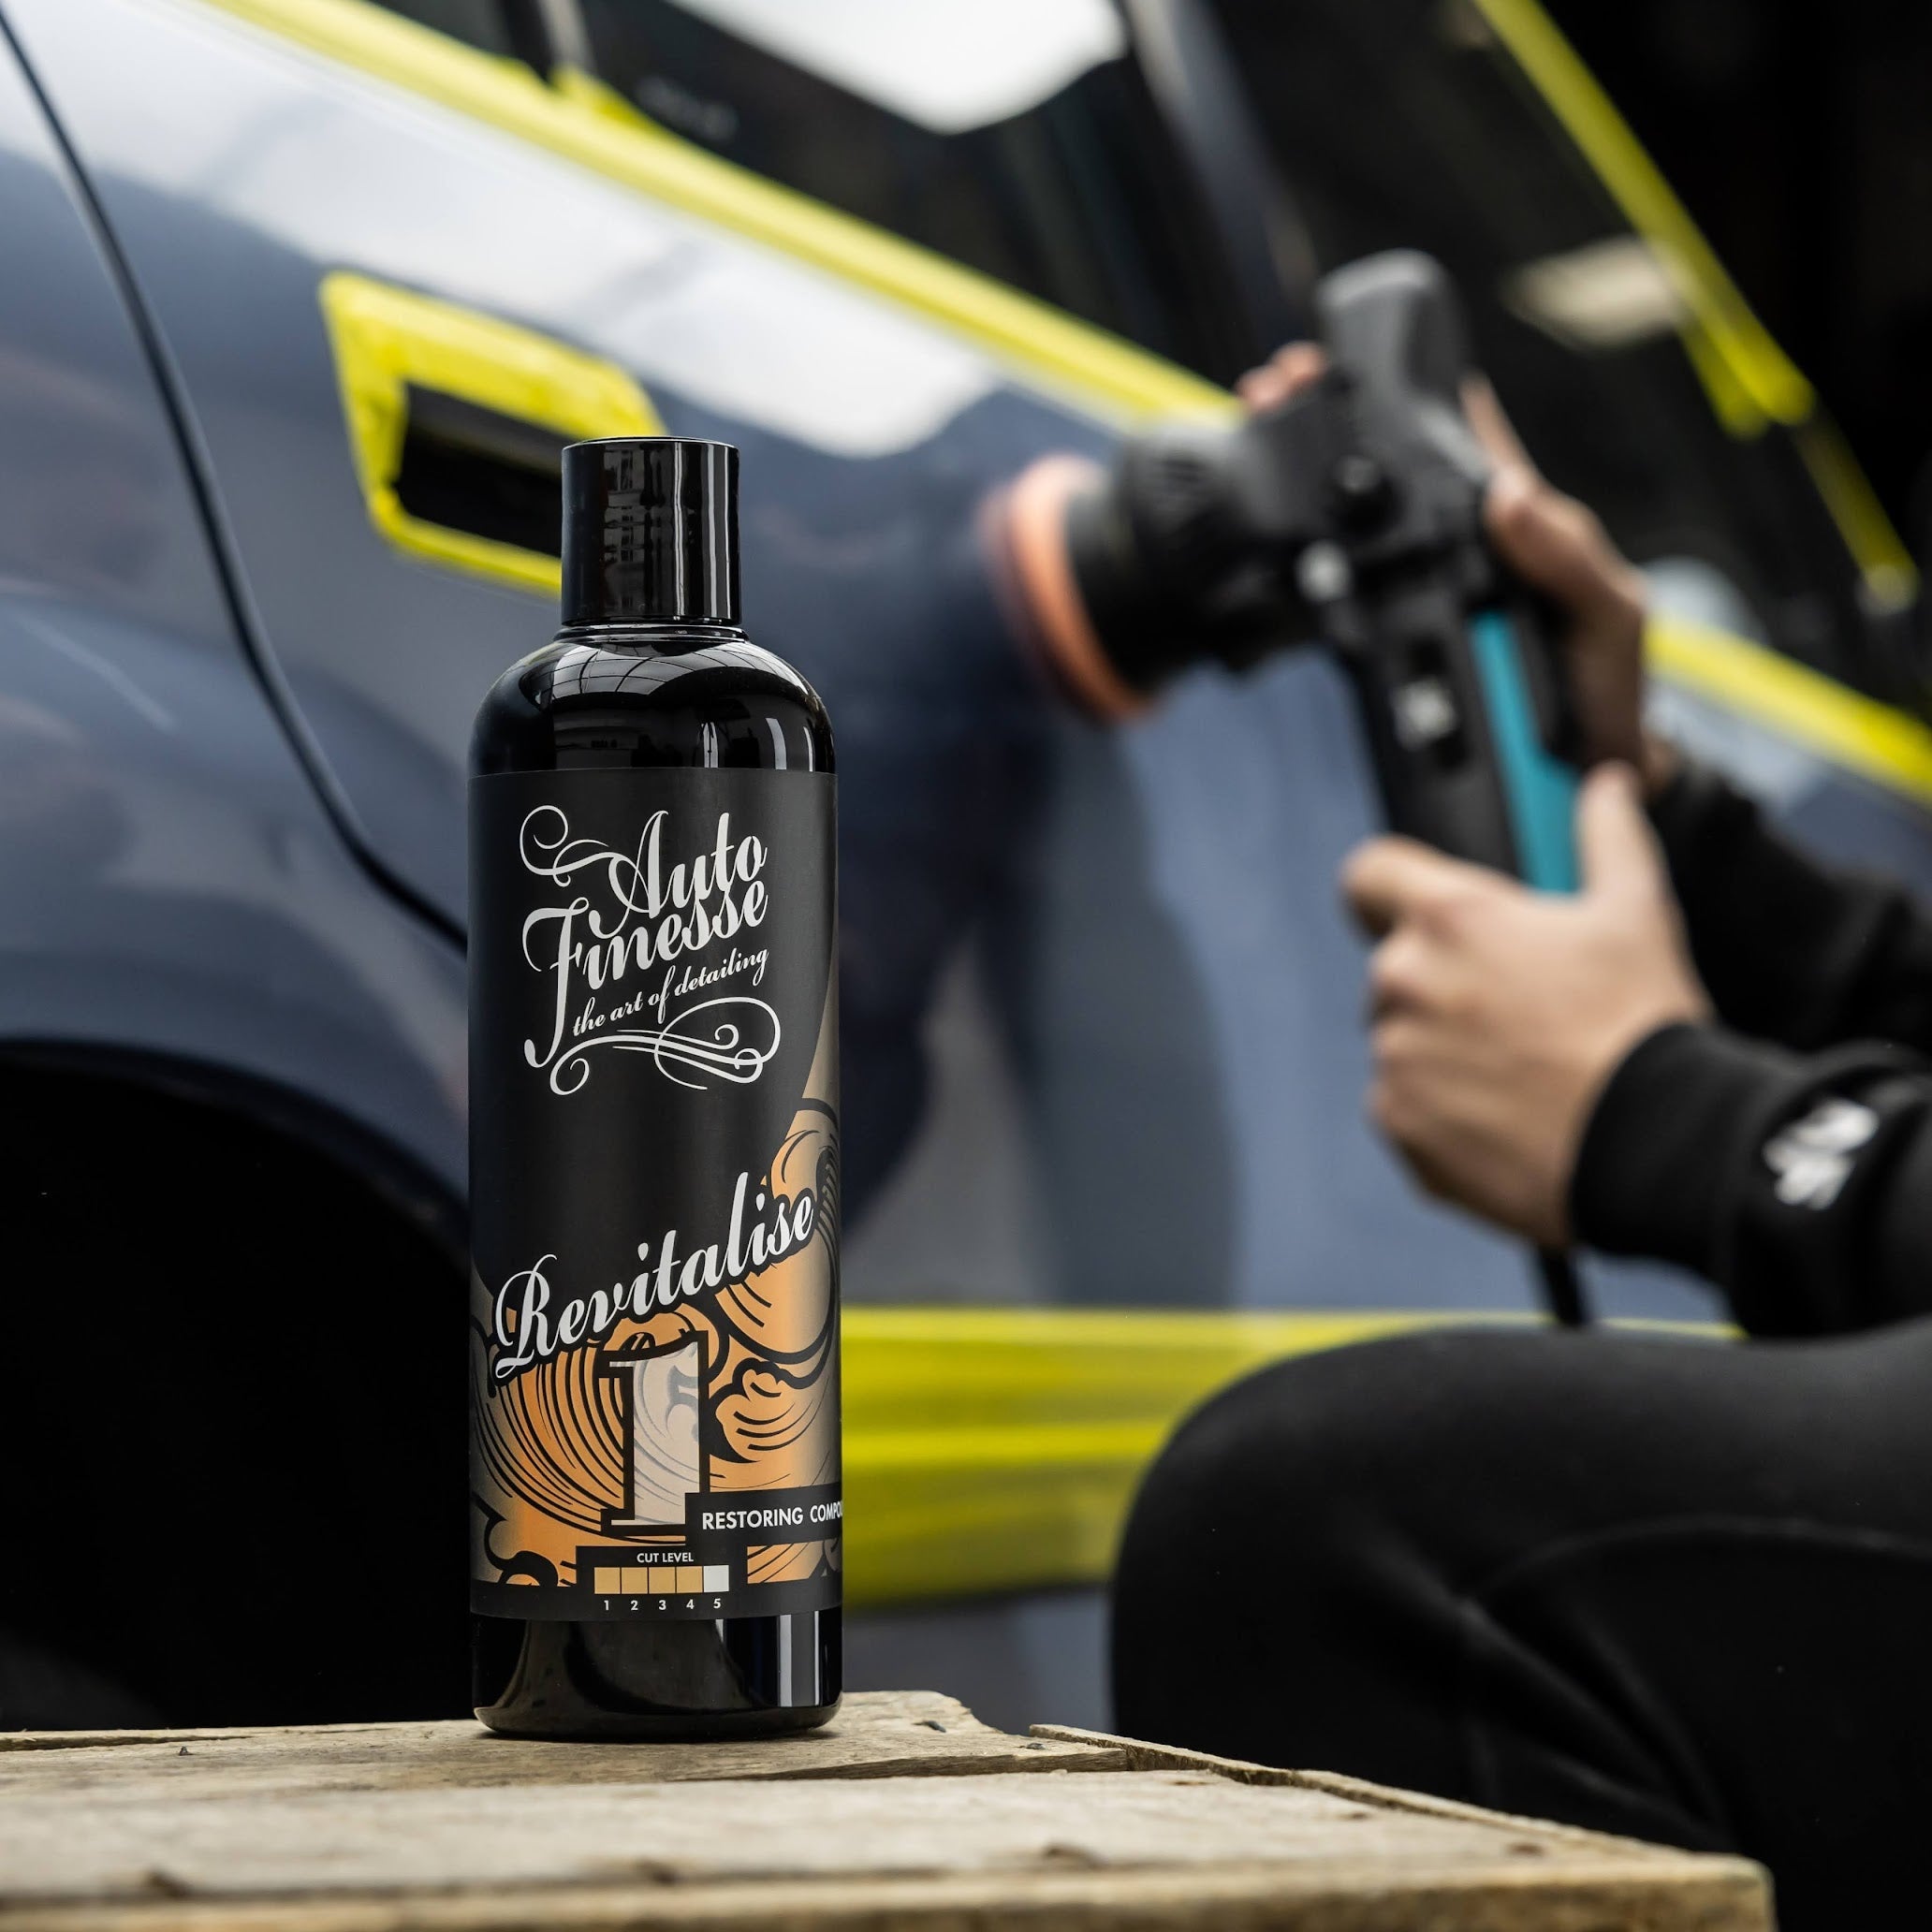 Auto Finesse | Car Detailing Products | Revitalise No:1